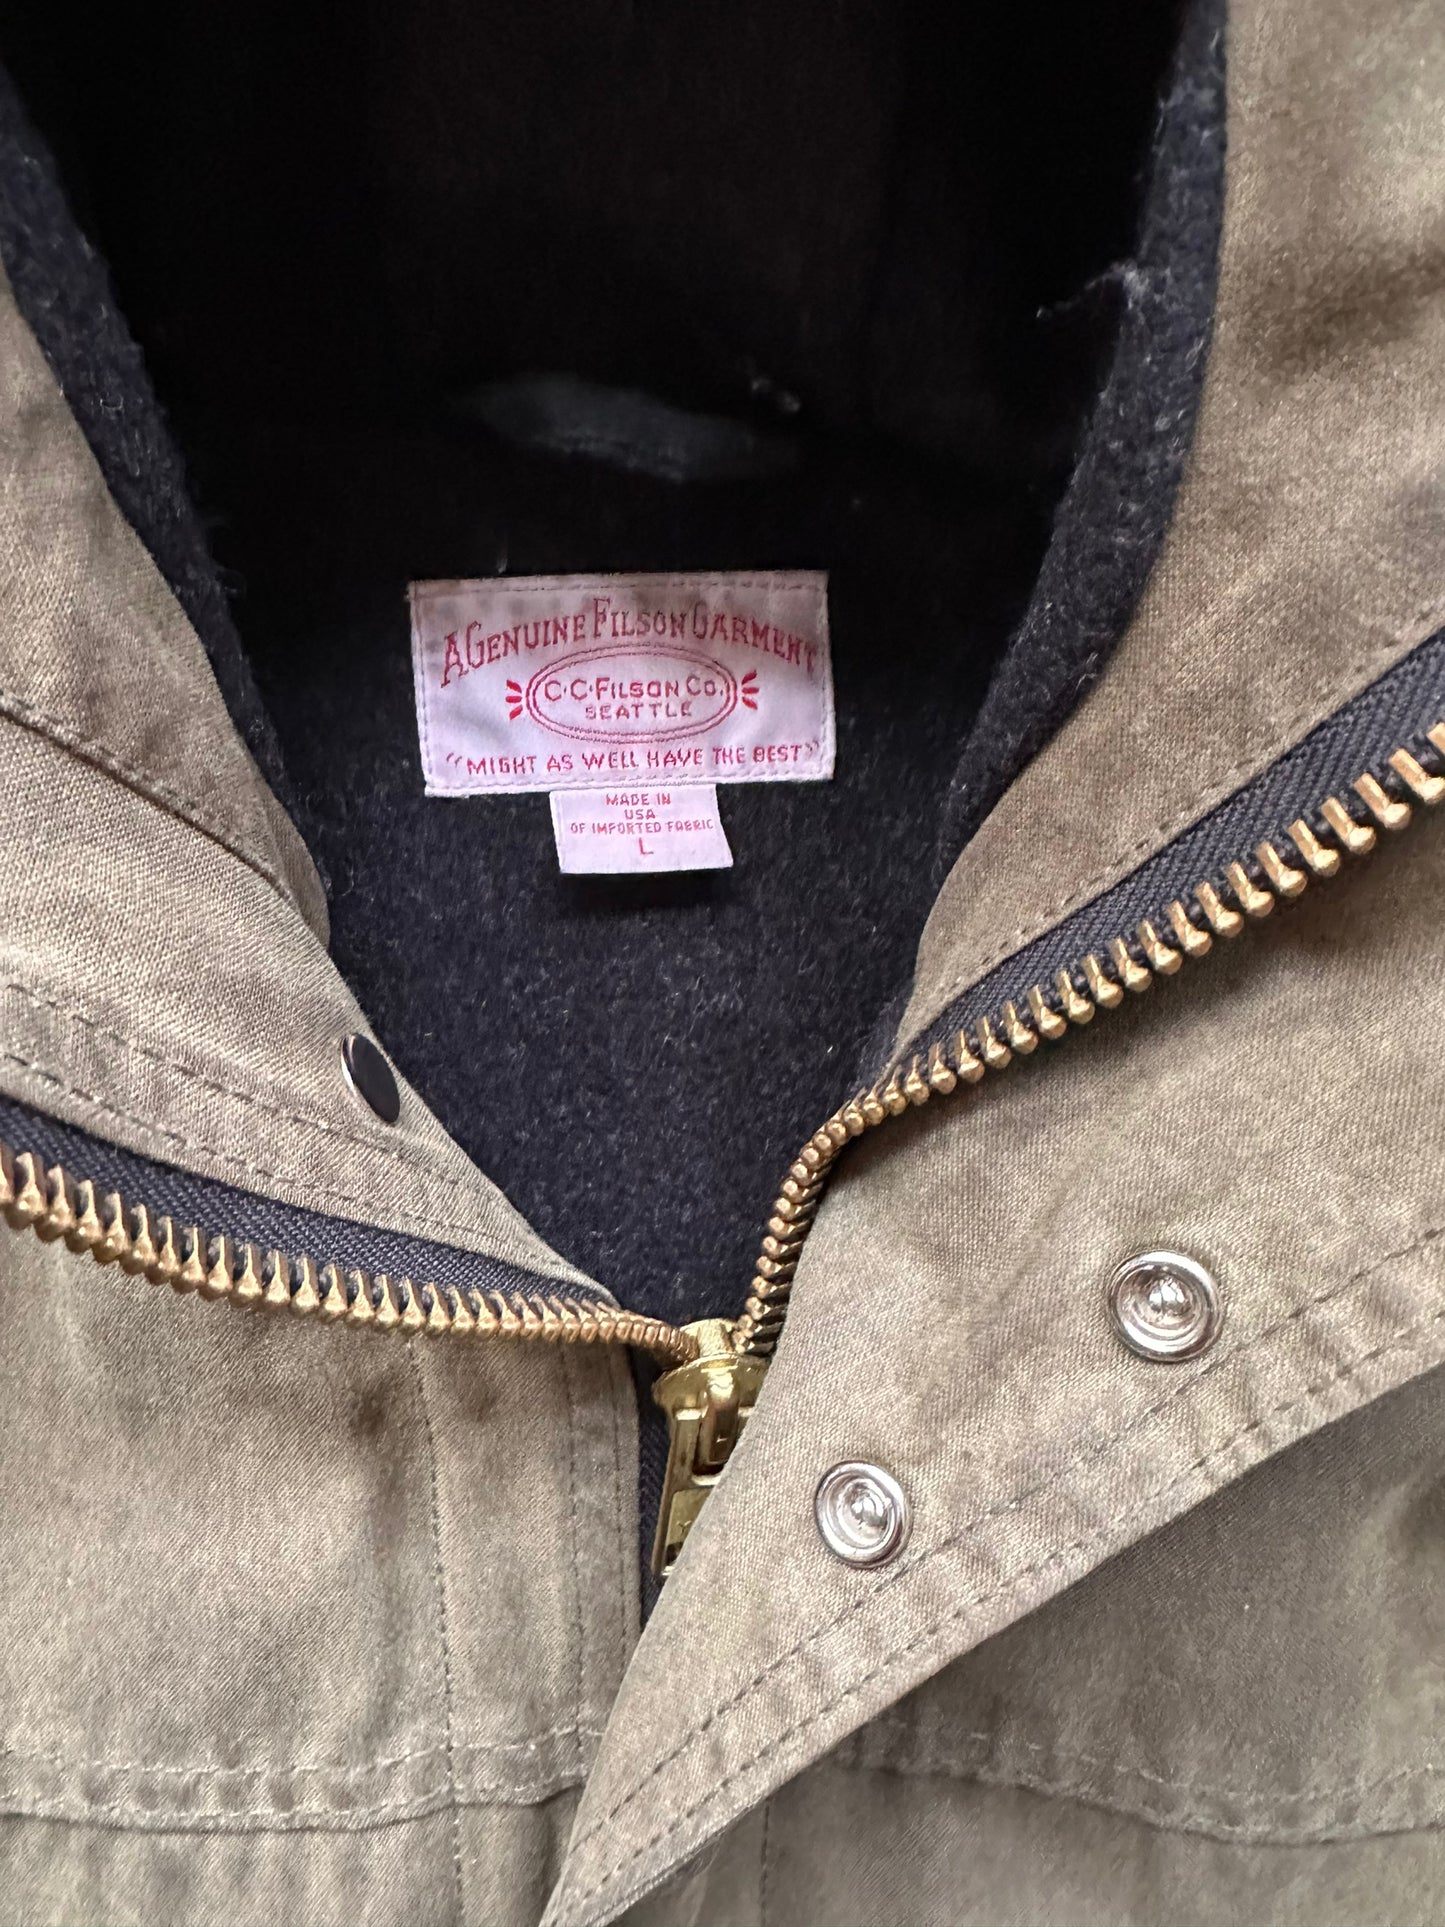 Tag View of Filson Foothills Parka SZ L |  Filson Tin Cloth Jackets Seattle | Barn Owl Vintage Clothing Seattle